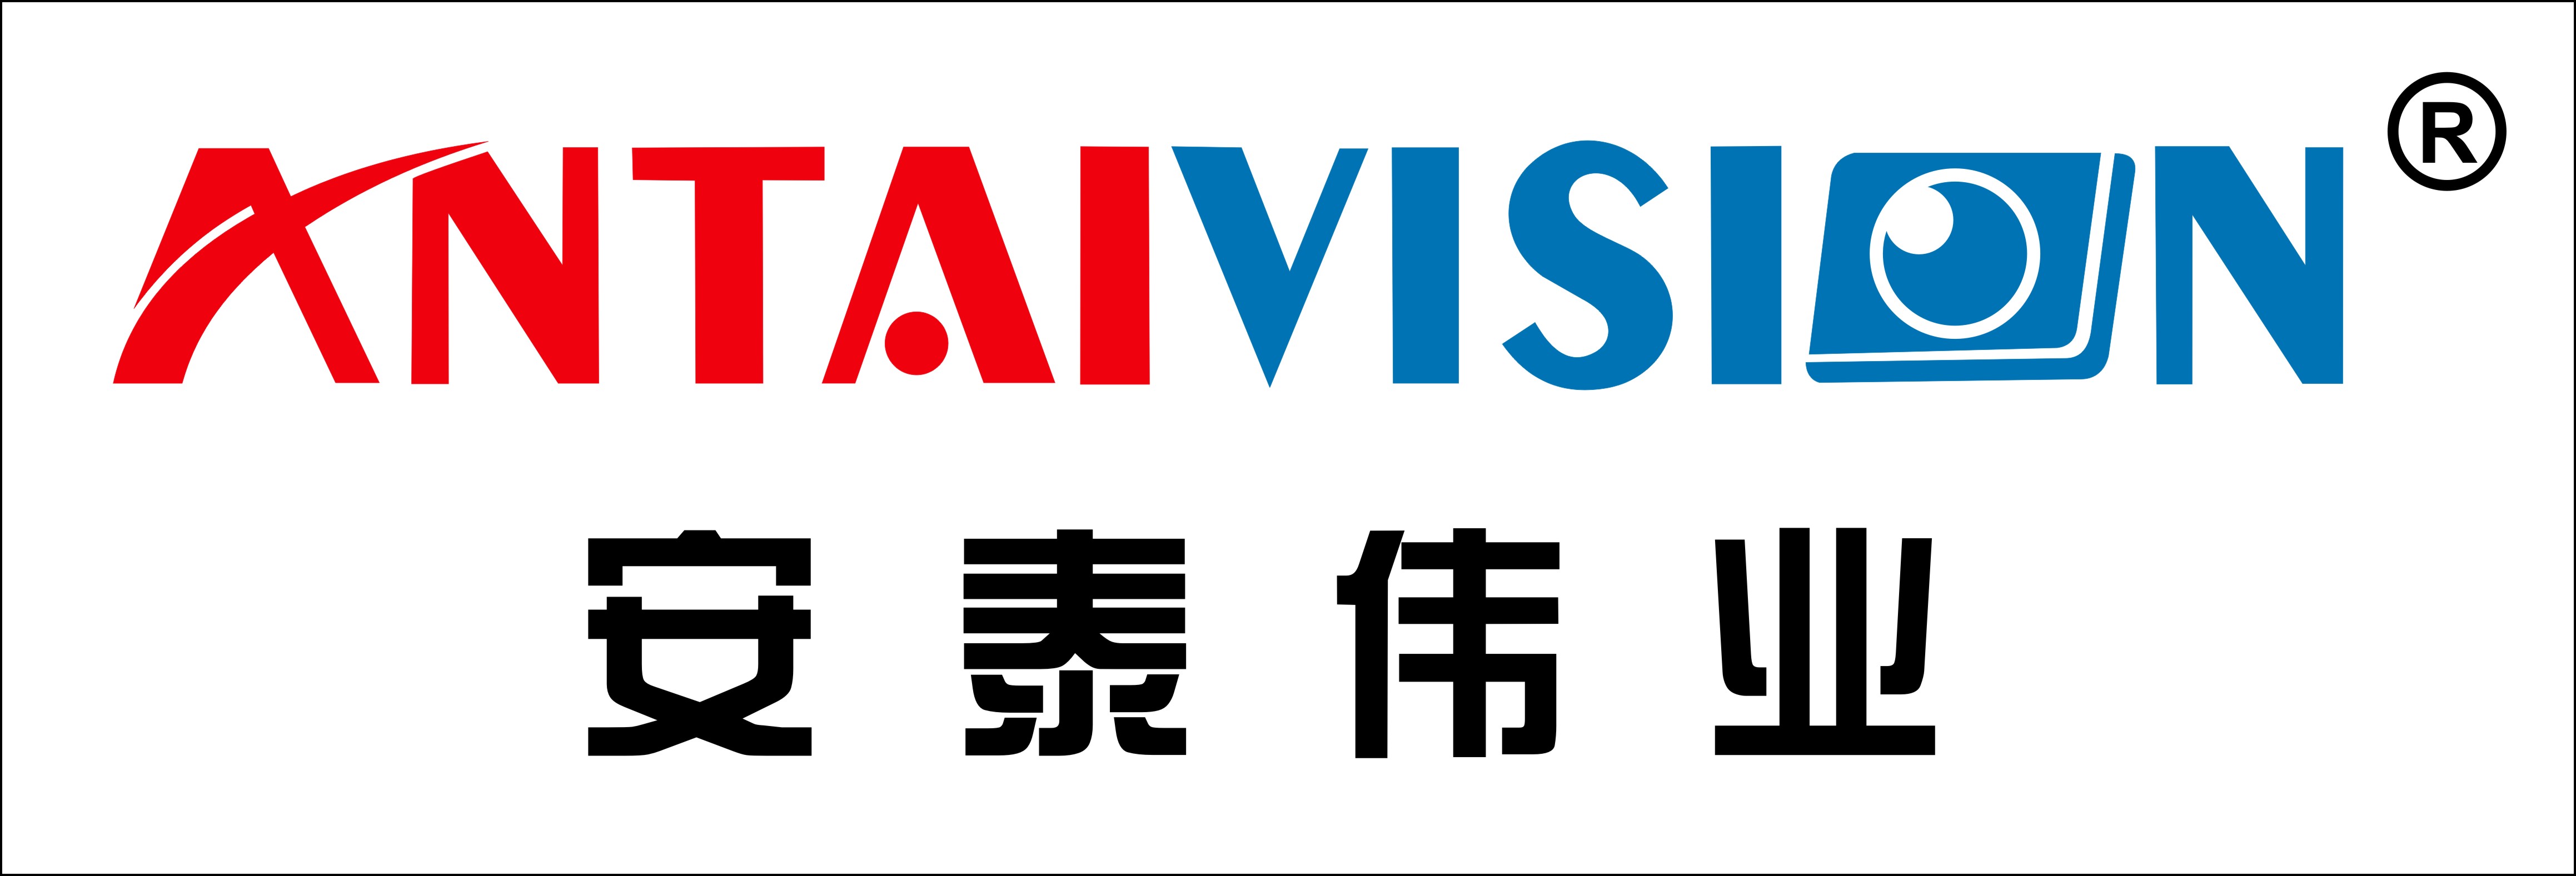 antaivision